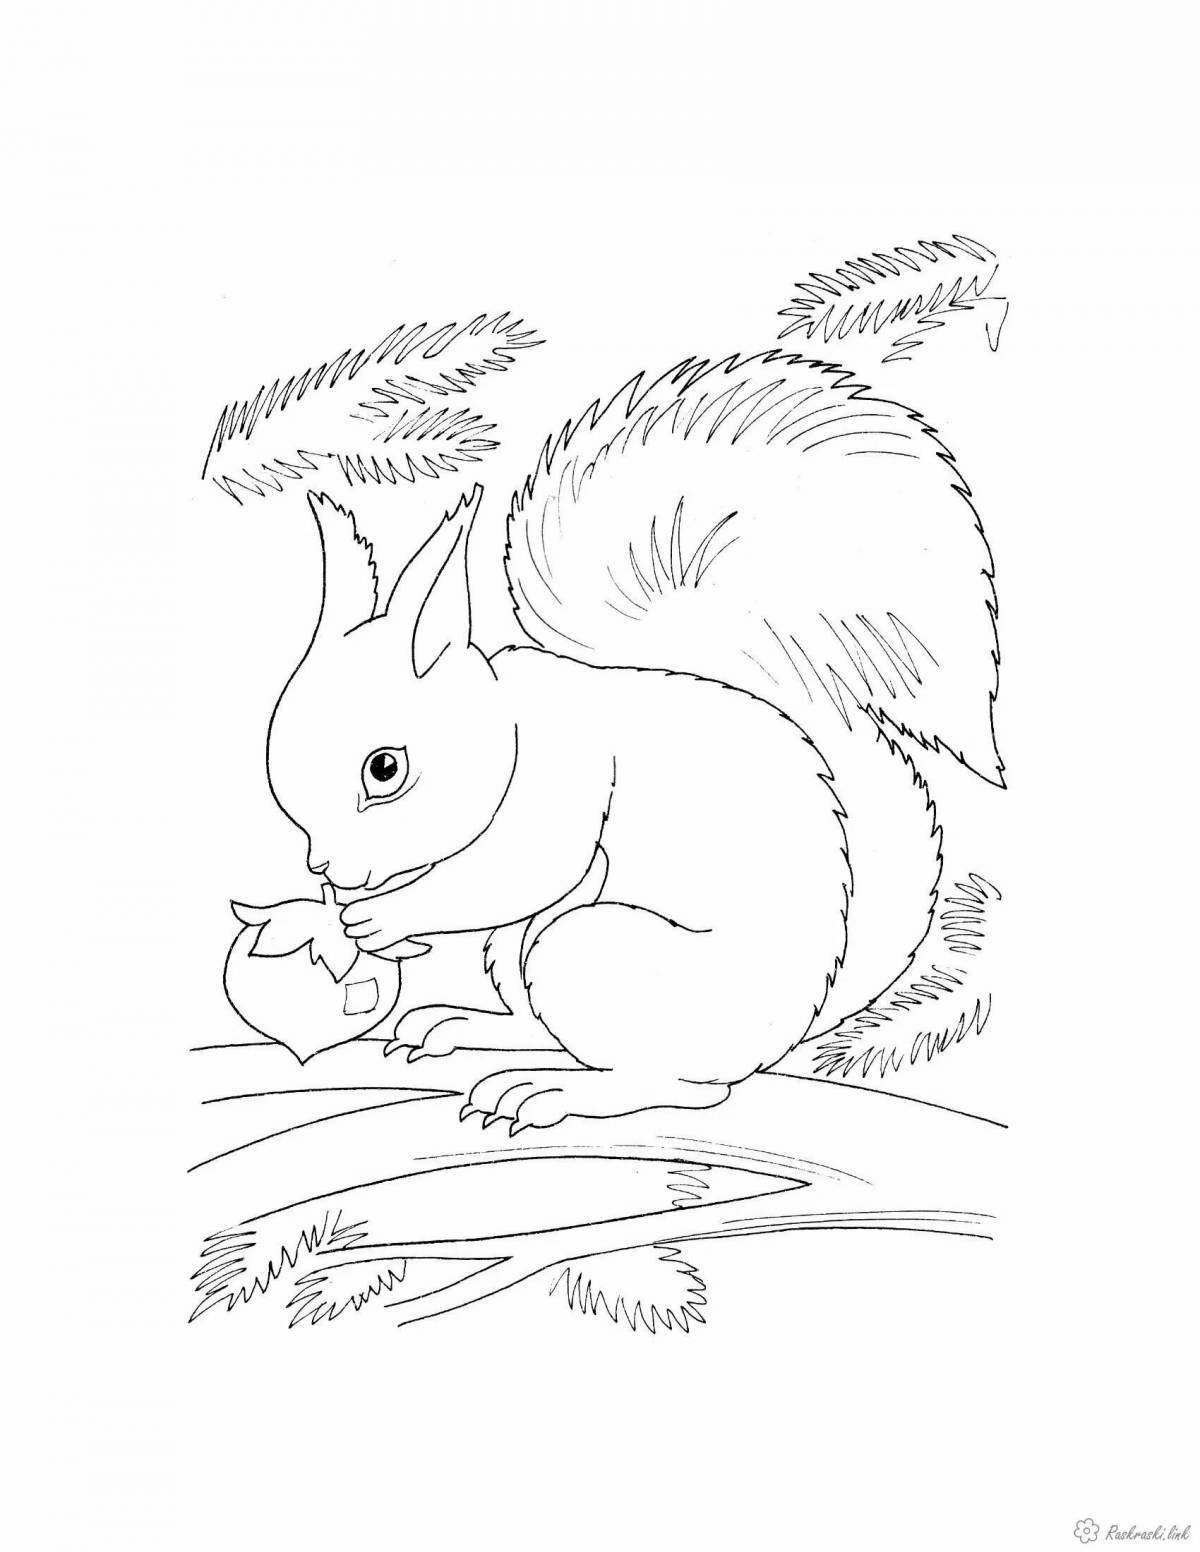 Fabulous squirrel coloring book for kids